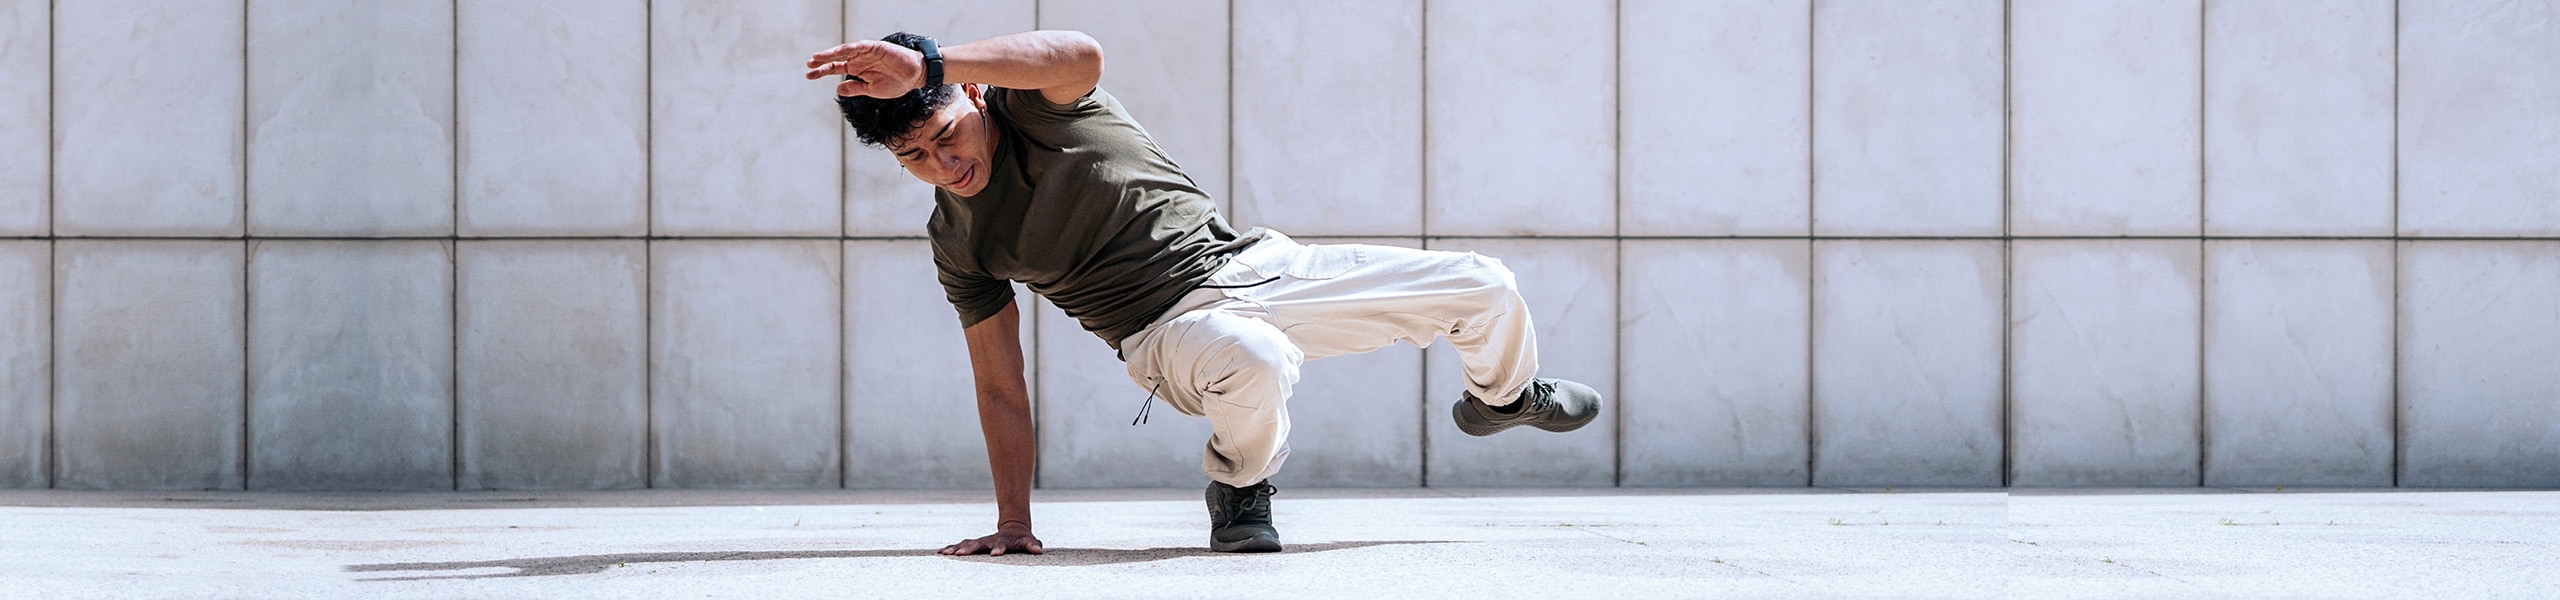 Breakdancer doing a down rock move